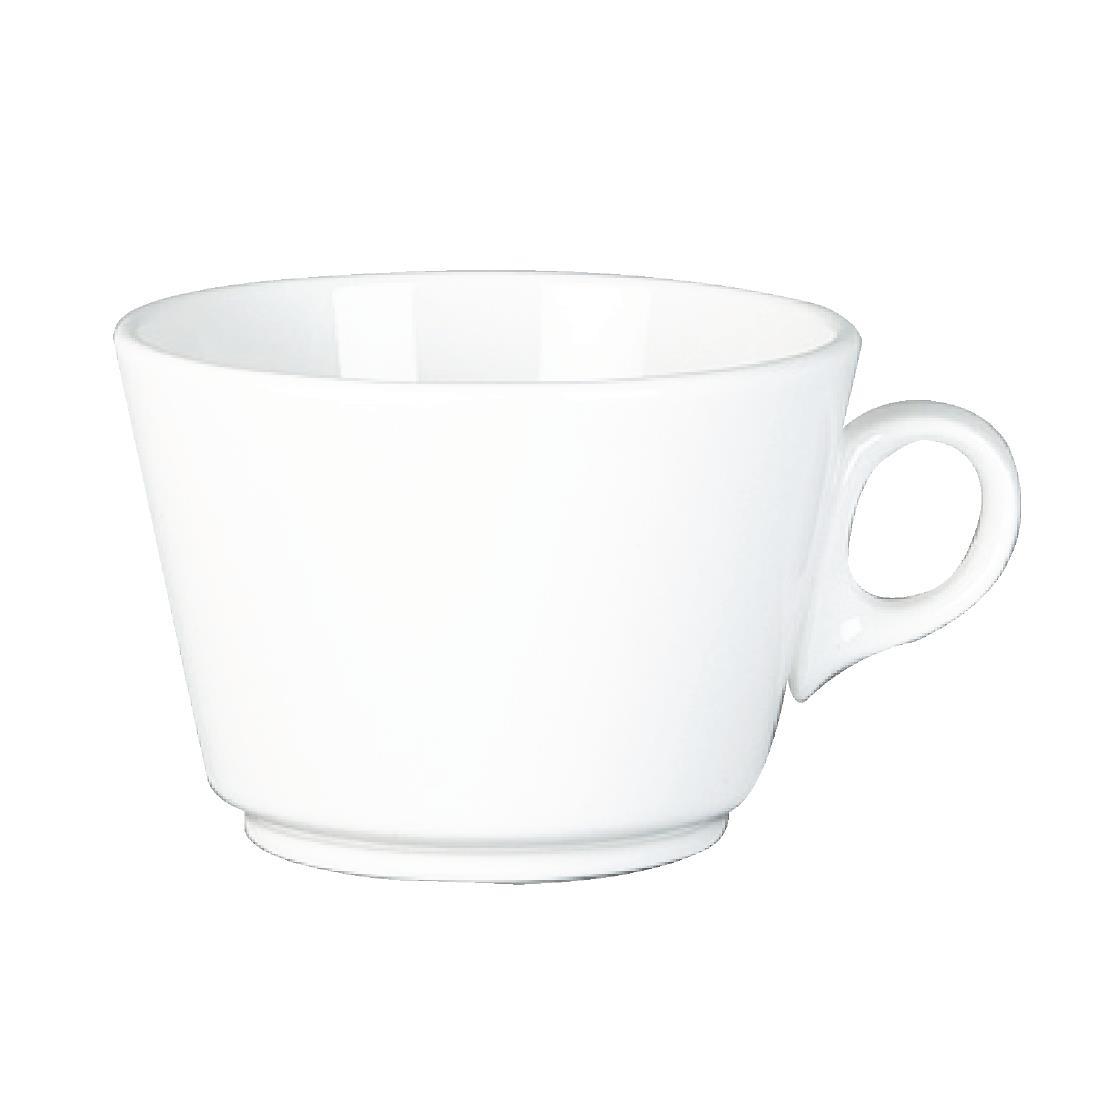 Steelite Simplicity White Grand Cafe Cups 75ml (Pack of 12) - V7752  - 1